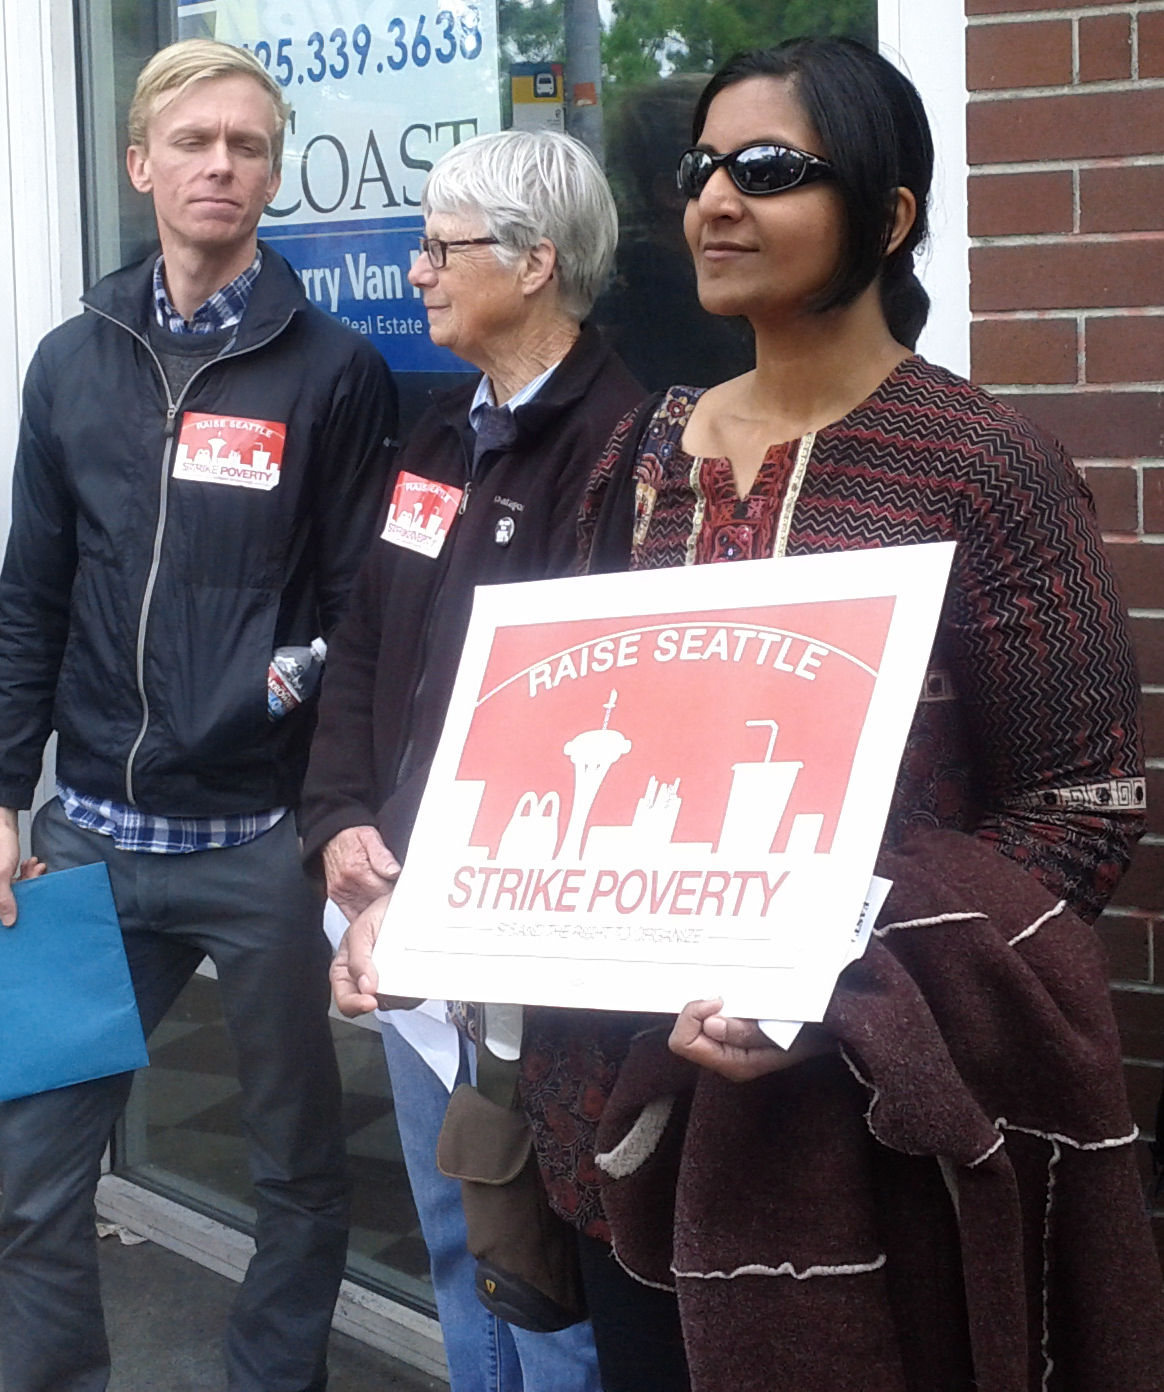 Adding punctuation to what’s been a dizzying last week for Kshama Sawant’s